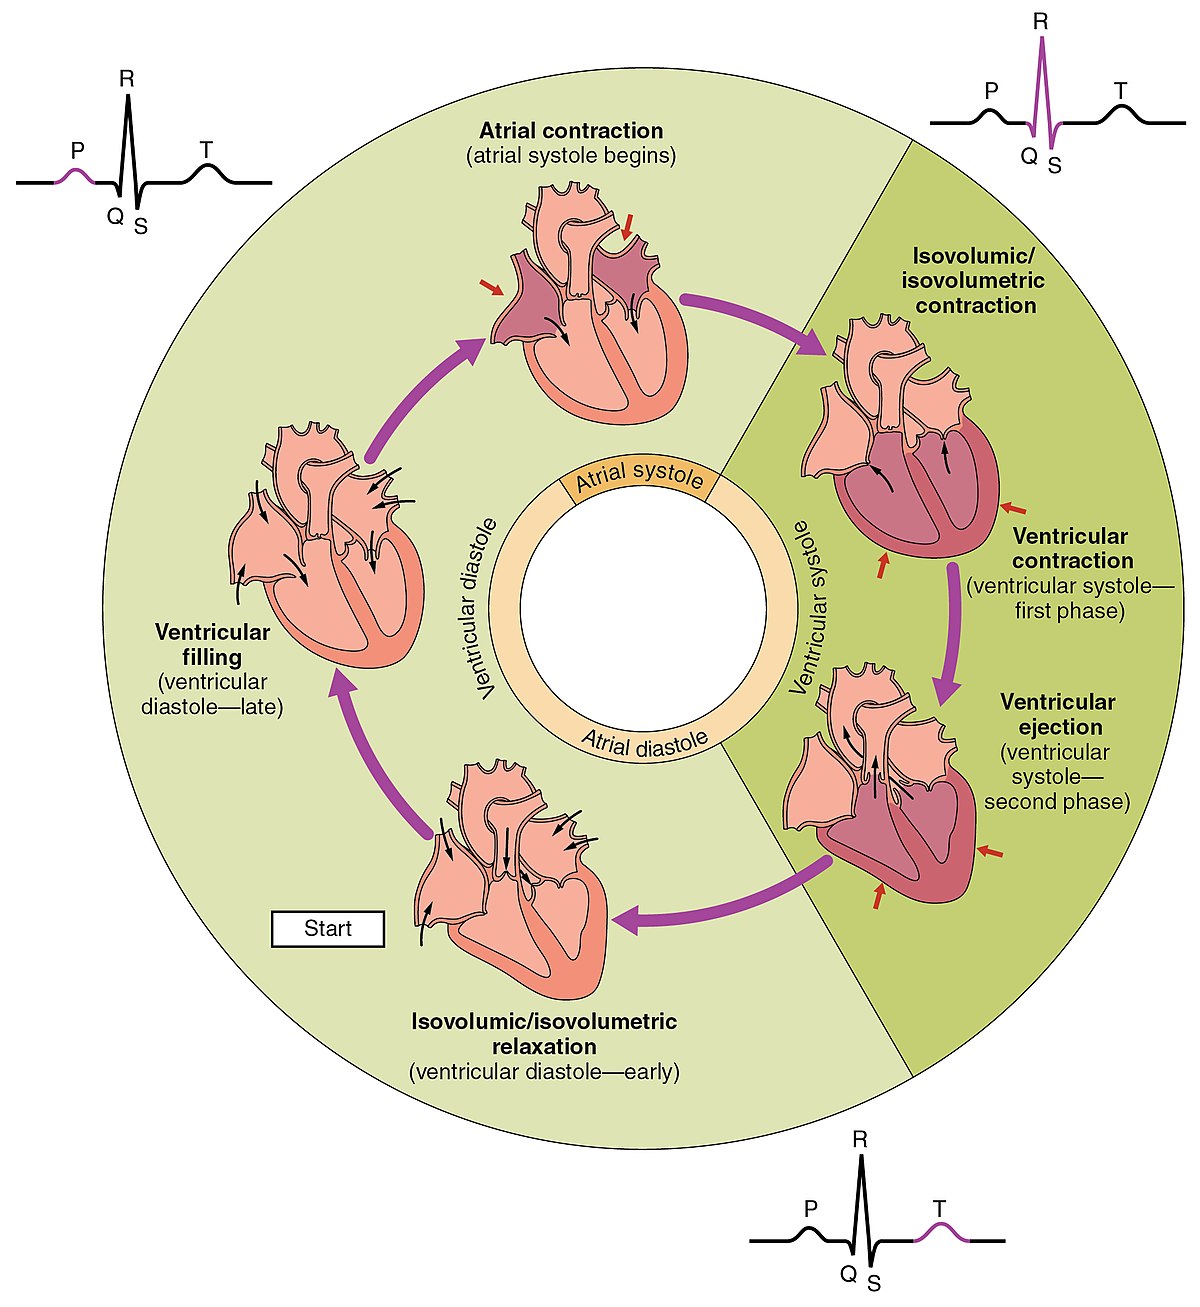 2027 Phases of the Cardiac Cycle.jpg